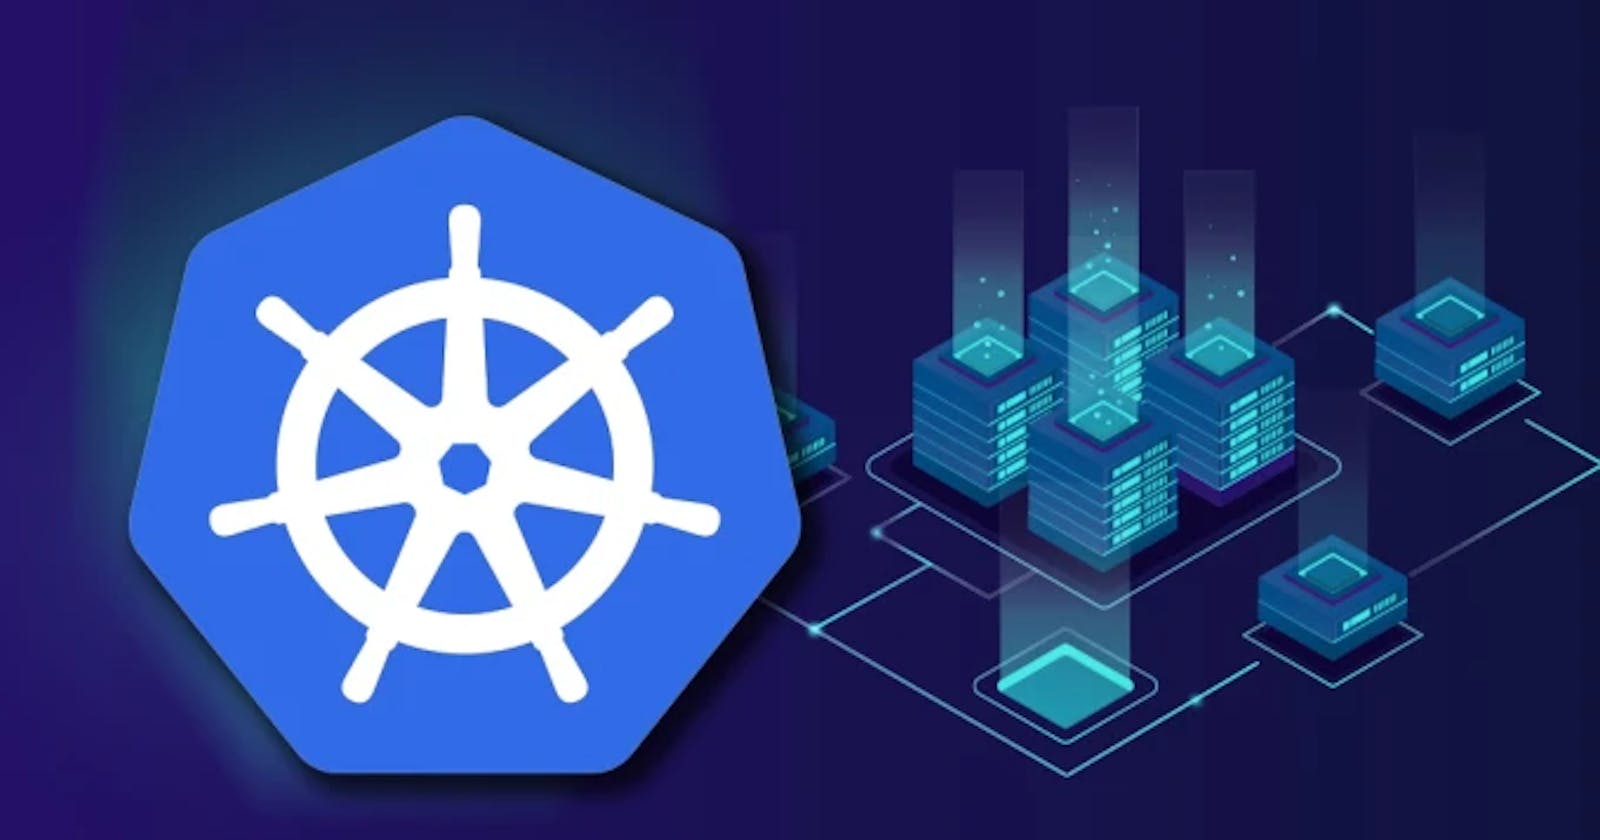 Kubernetes Services and Service Discovery